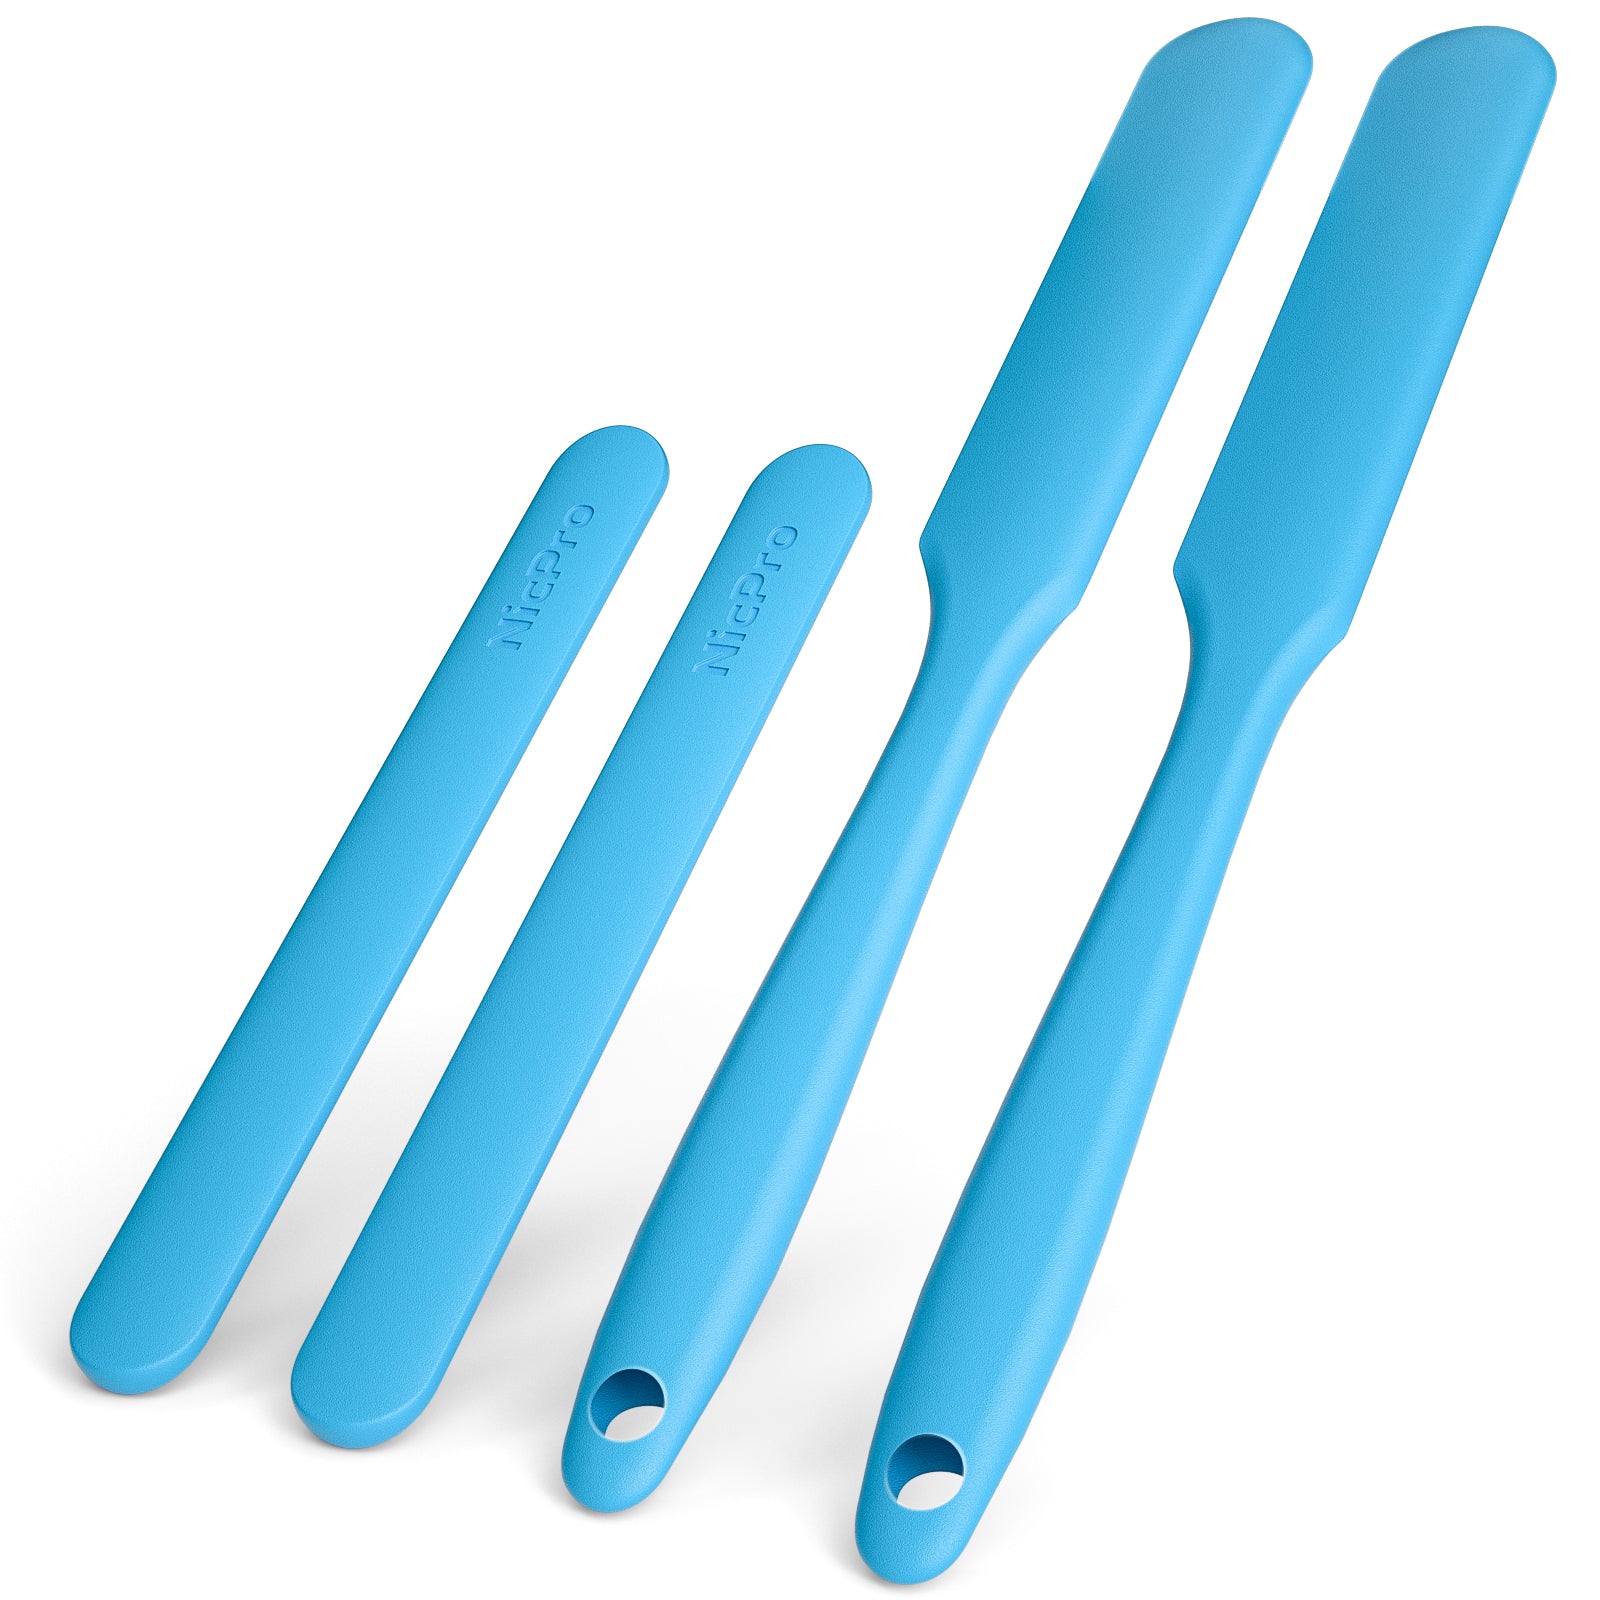 Nicpro Silicone Stir Sticks Kit, 2 PCS Silicone Resin Popsicle Sticks & 2 PCS Silicone Spatula Scraper for Mixing Resin, Wax, Paint, Epoxy, DIY Crafts